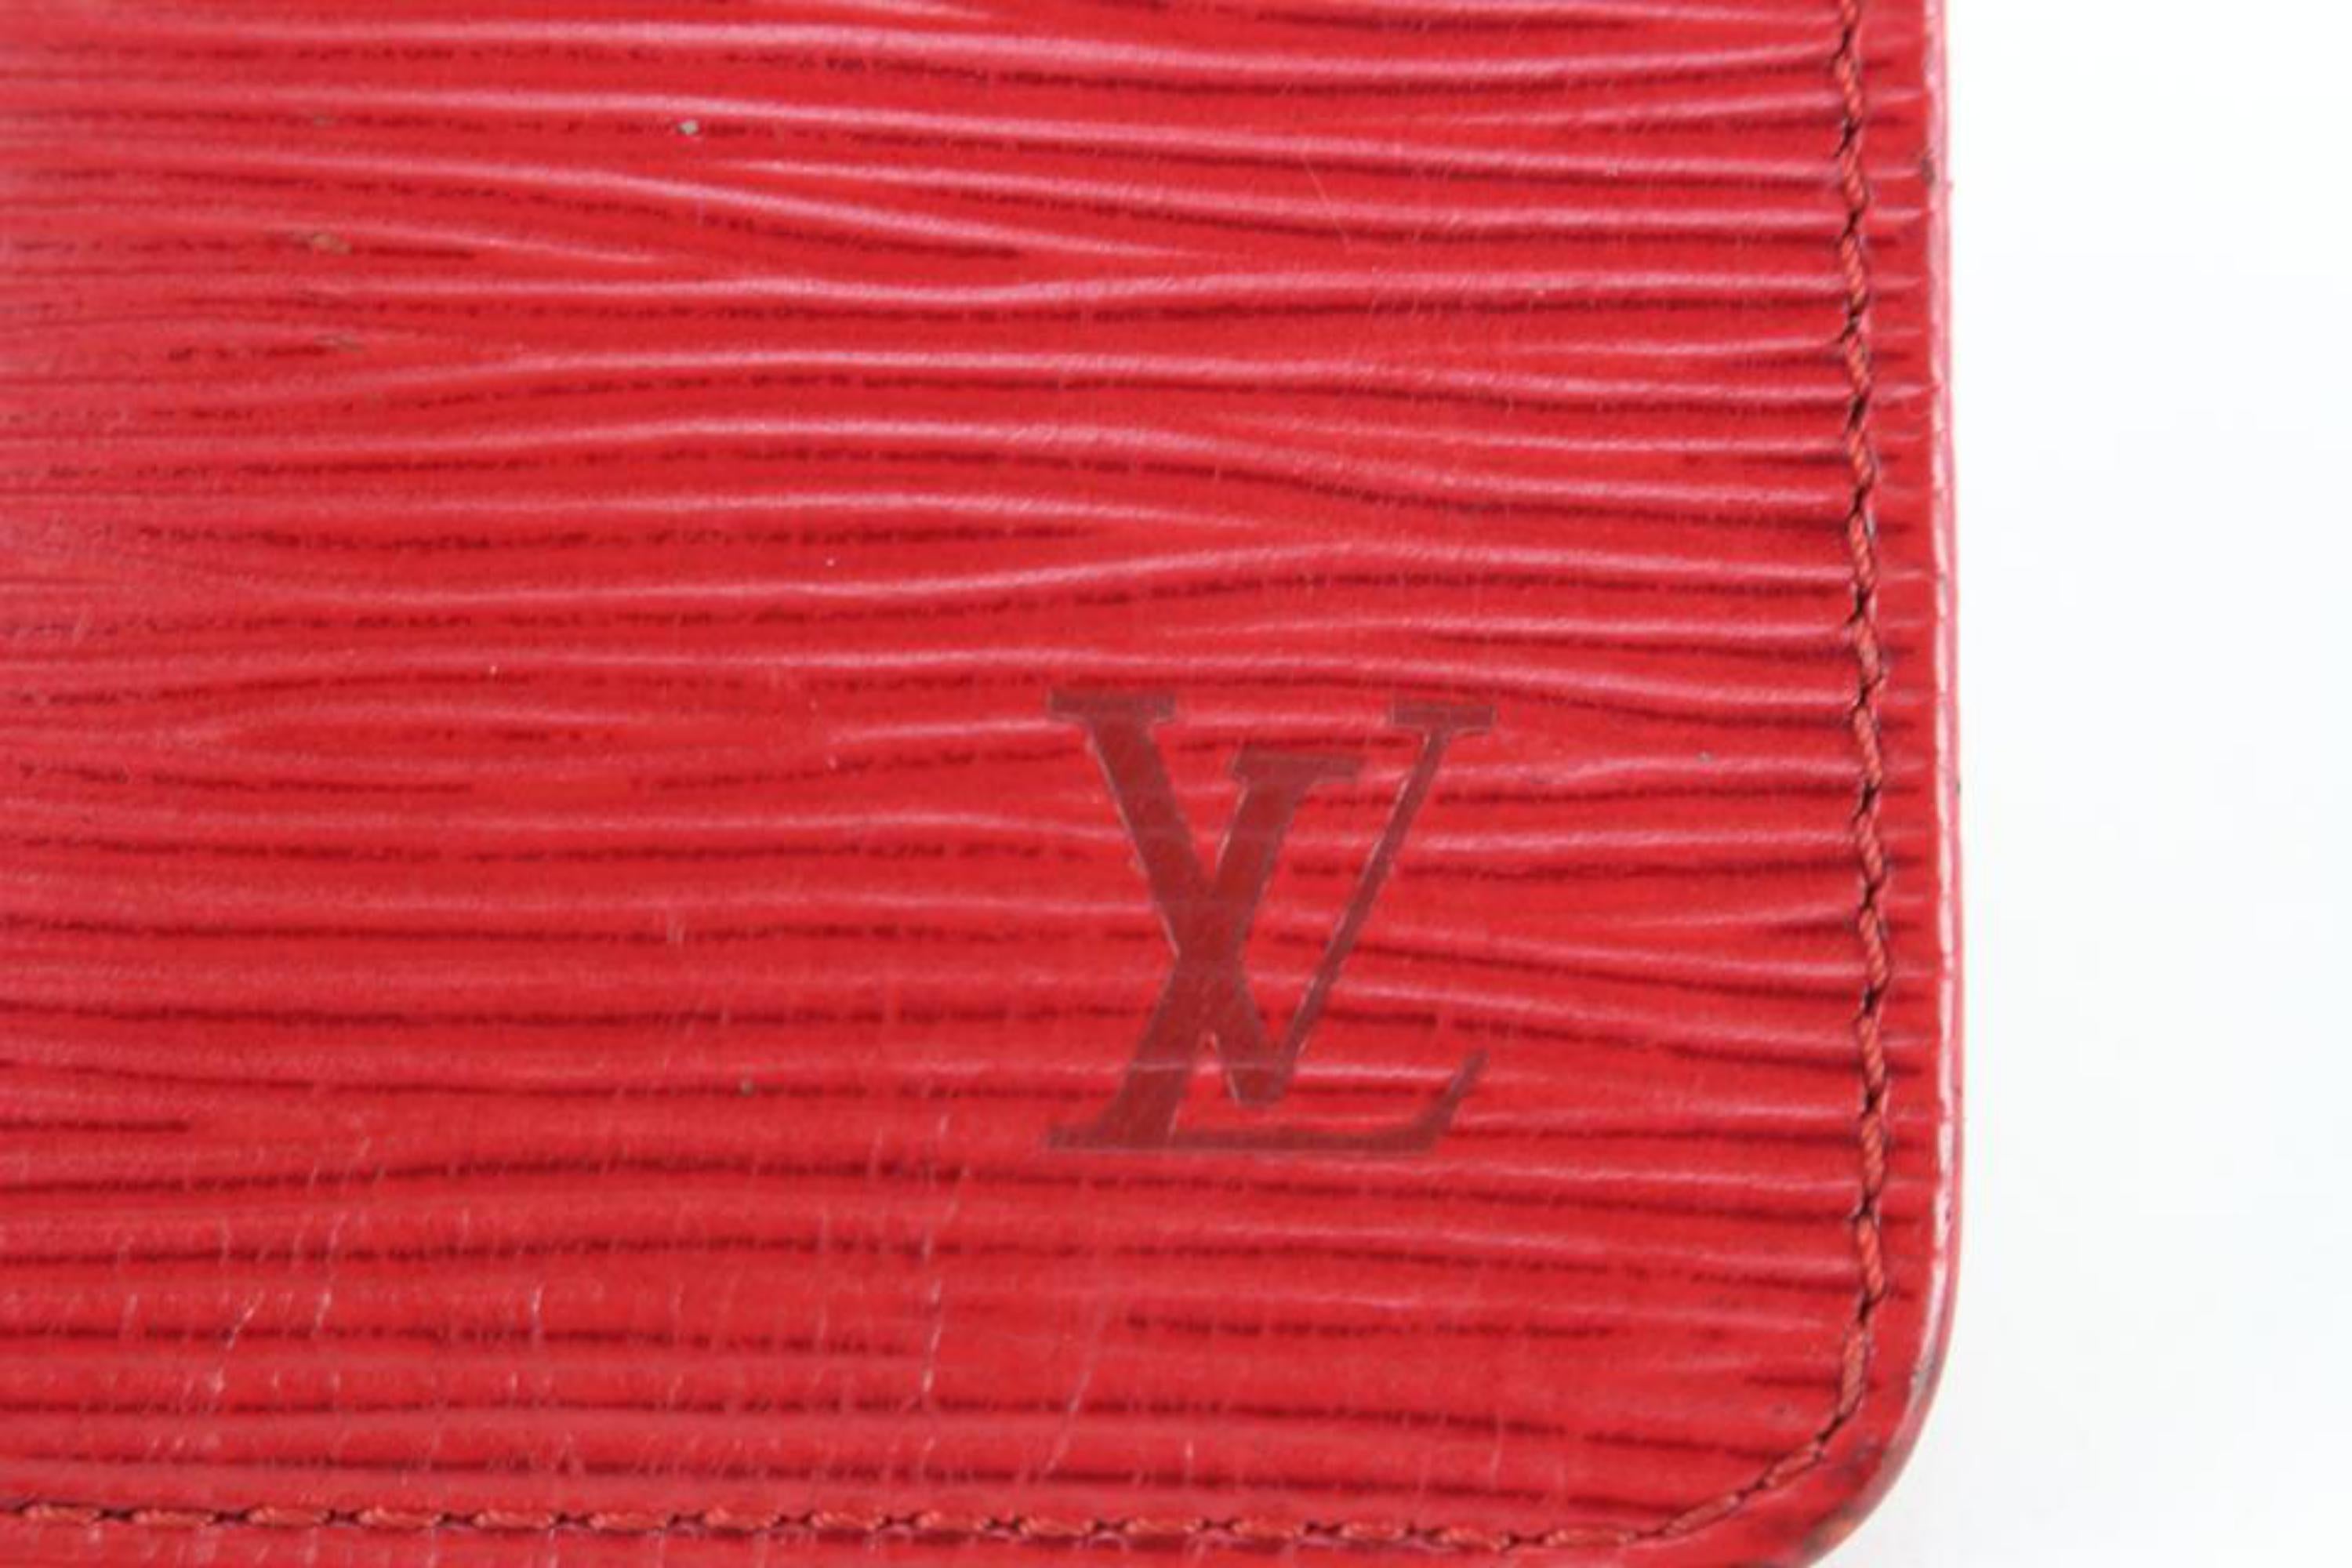 Louis Vuitton Red Epi Leather Key Pouch Coin Purse Pochette Cles69lz718s In Fair Condition For Sale In Dix hills, NY